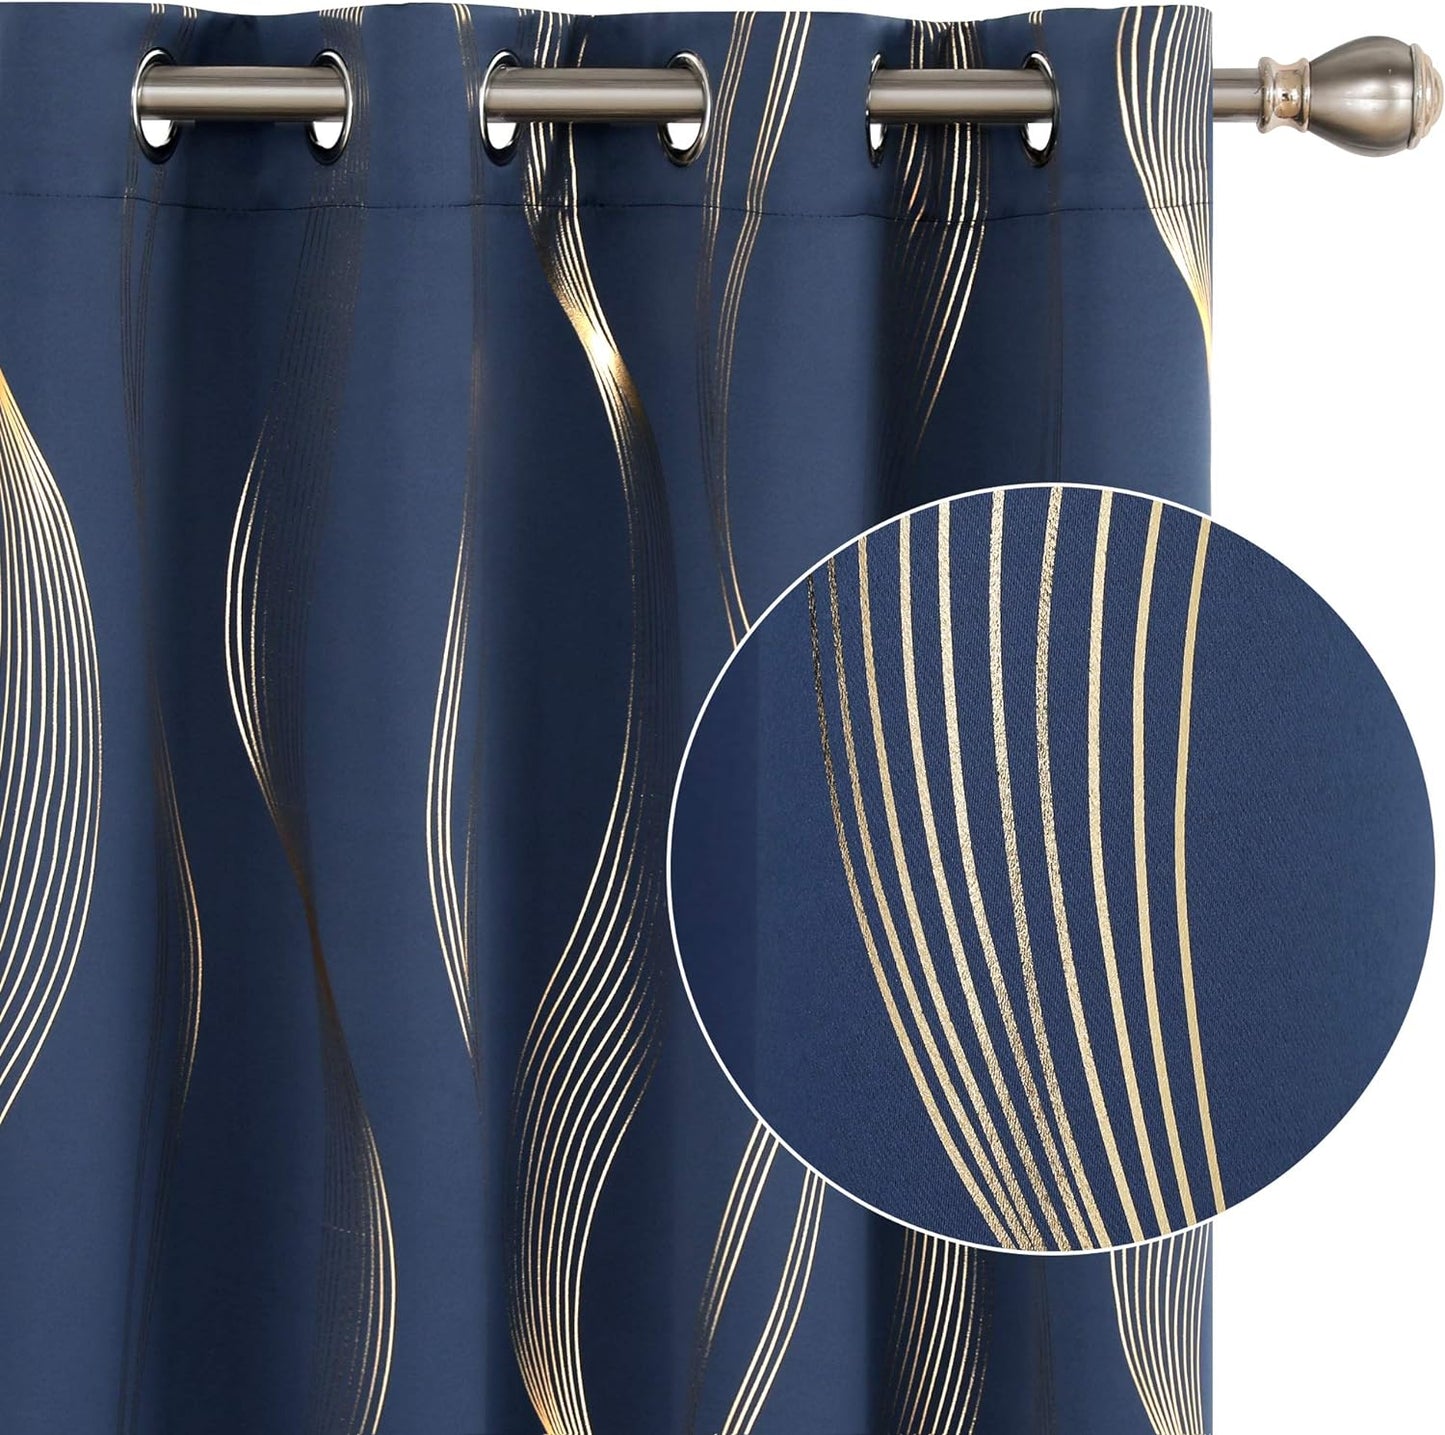 Deconovo Thermal Insulated Blackout Curtains for Bedroom, with Silver Print Wave Striped Pattern- Black Out Light Blocking Panels - Navy Blue, 52W X 84L Inch, 2 Panels  deconovo Grommet- Gold/Navy Blue 52X95 Inch 